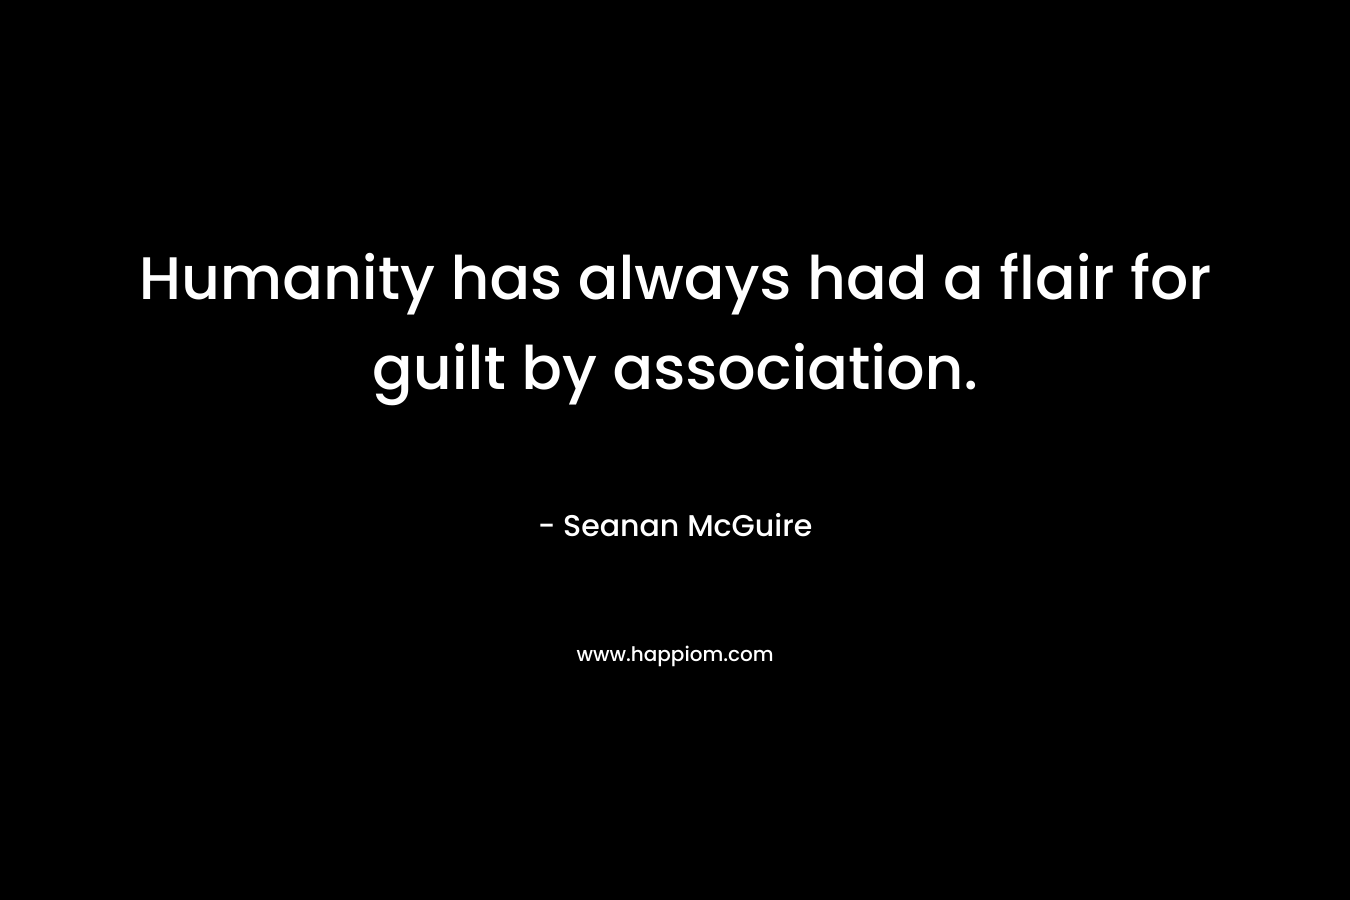 Humanity has always had a flair for guilt by association. – Seanan McGuire